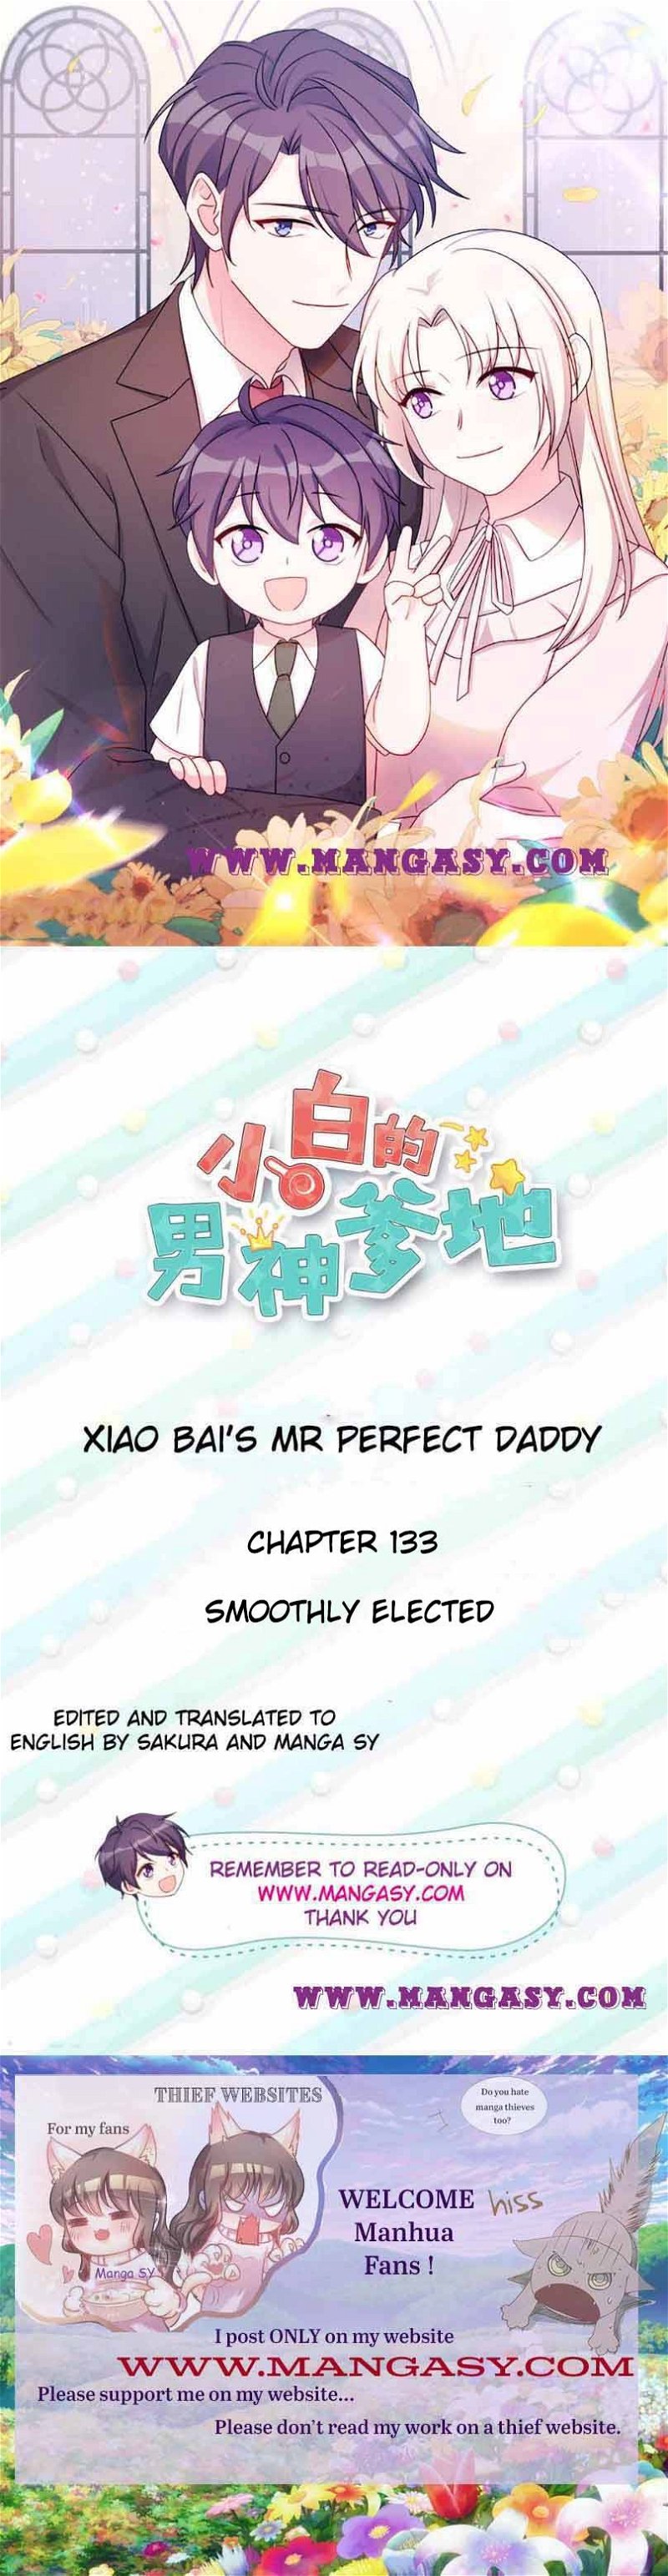 Xiao Bai’s father is a wonderful person Chapter 133 - Page 0